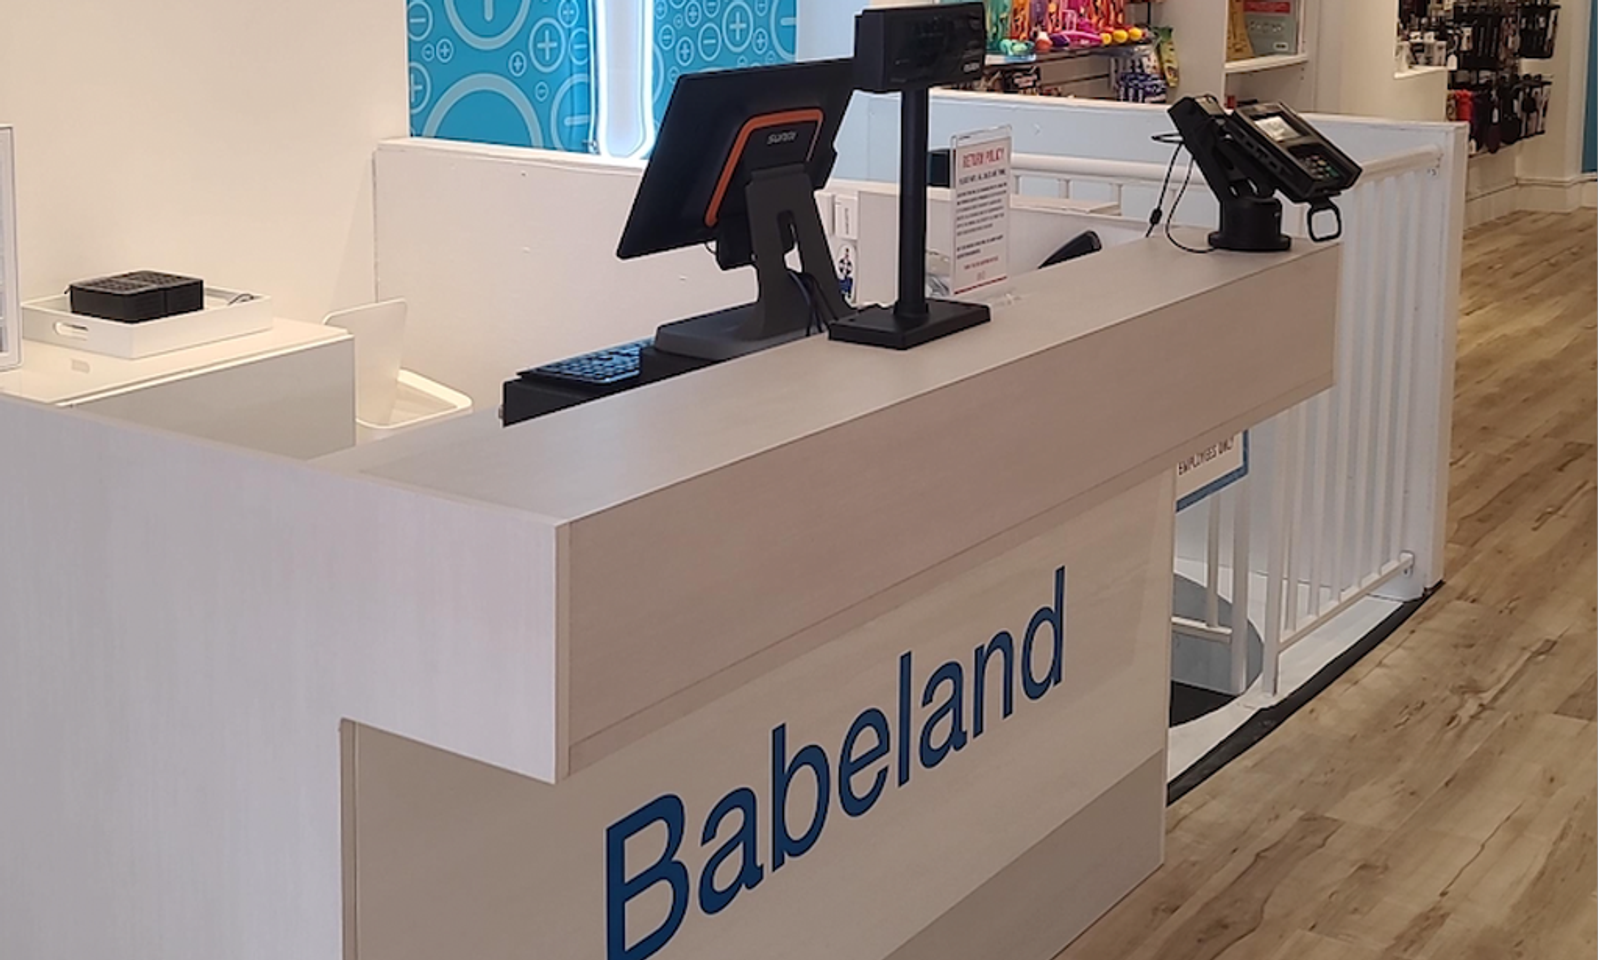 Babeland to Open New Store in Brooklyn